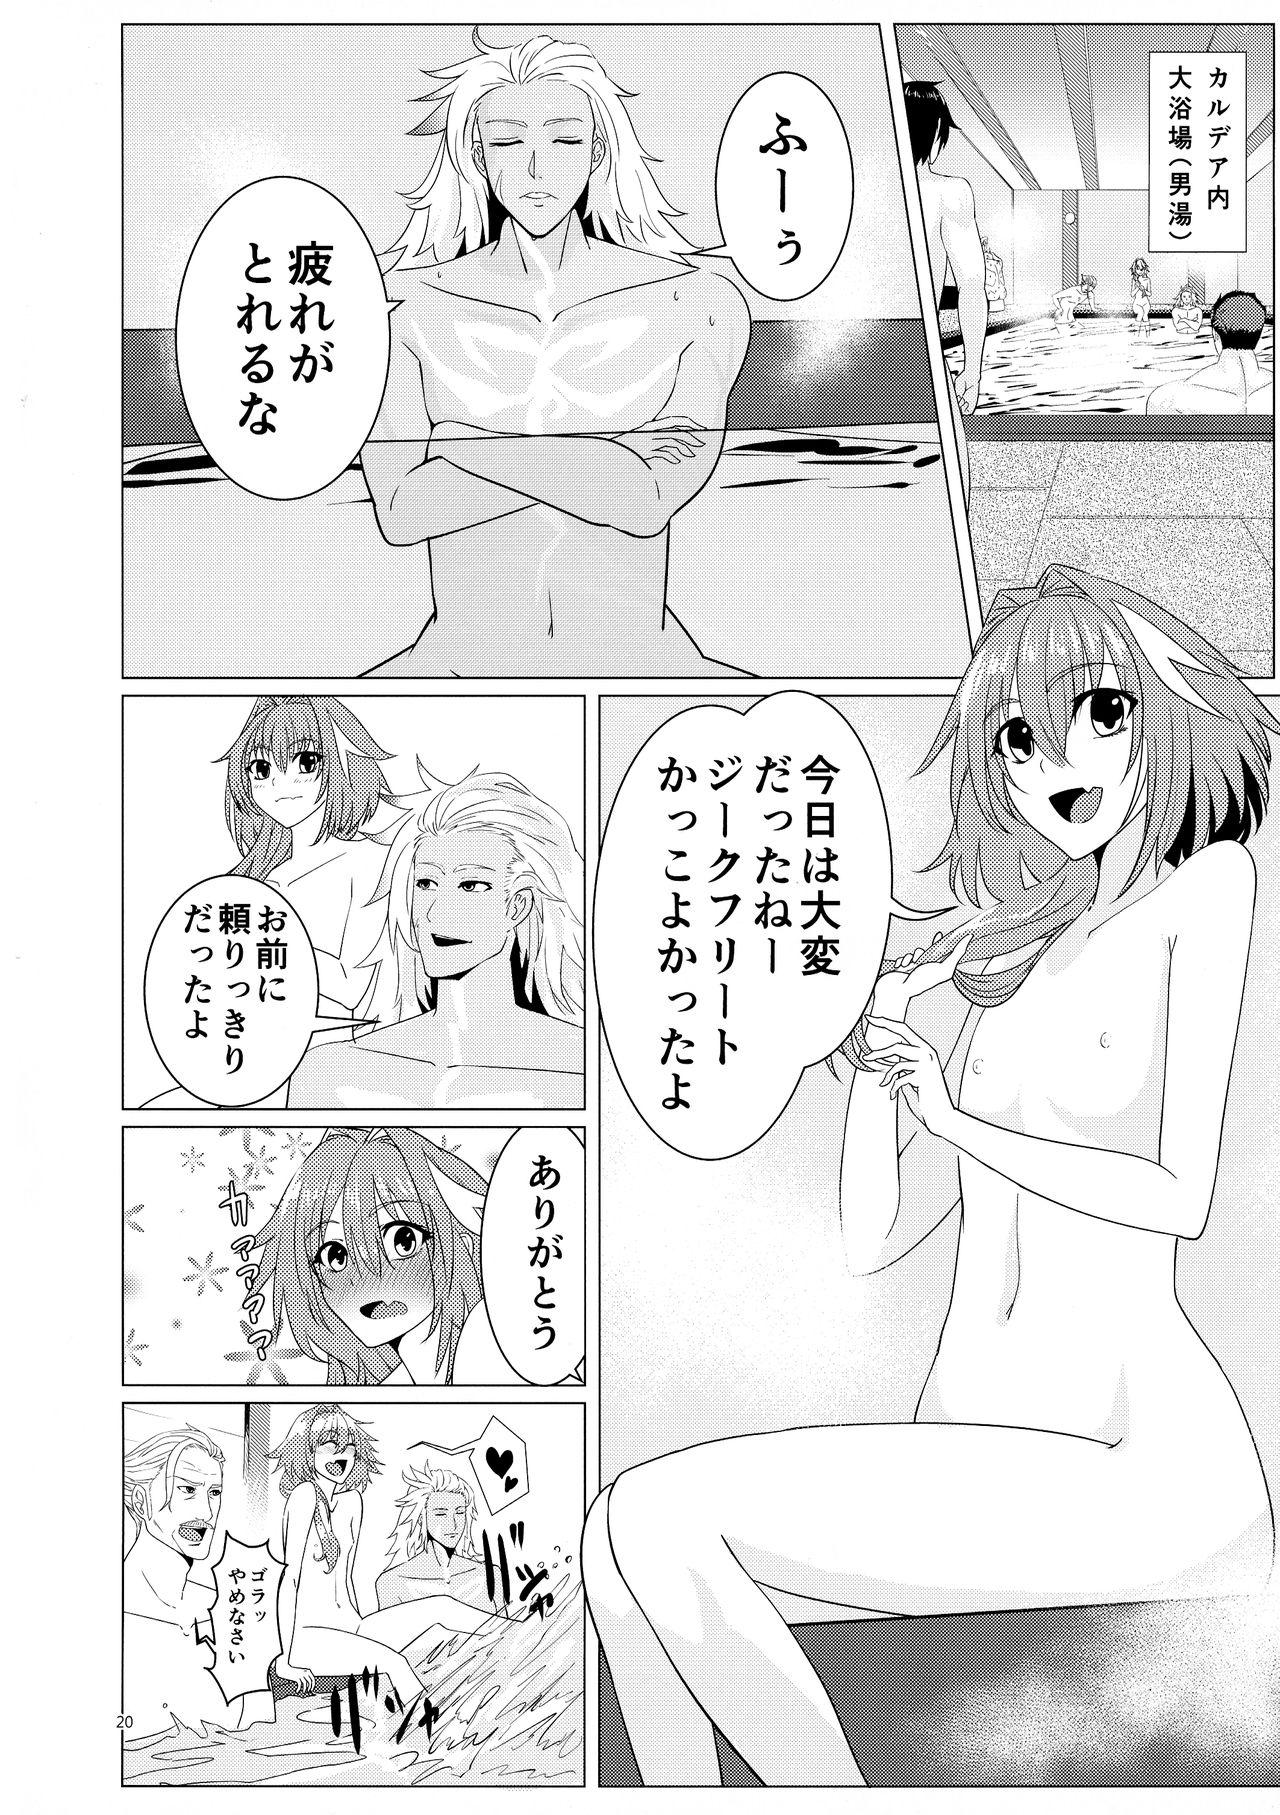 Matching Spirits - Jeanne and Astolfo have sex 16